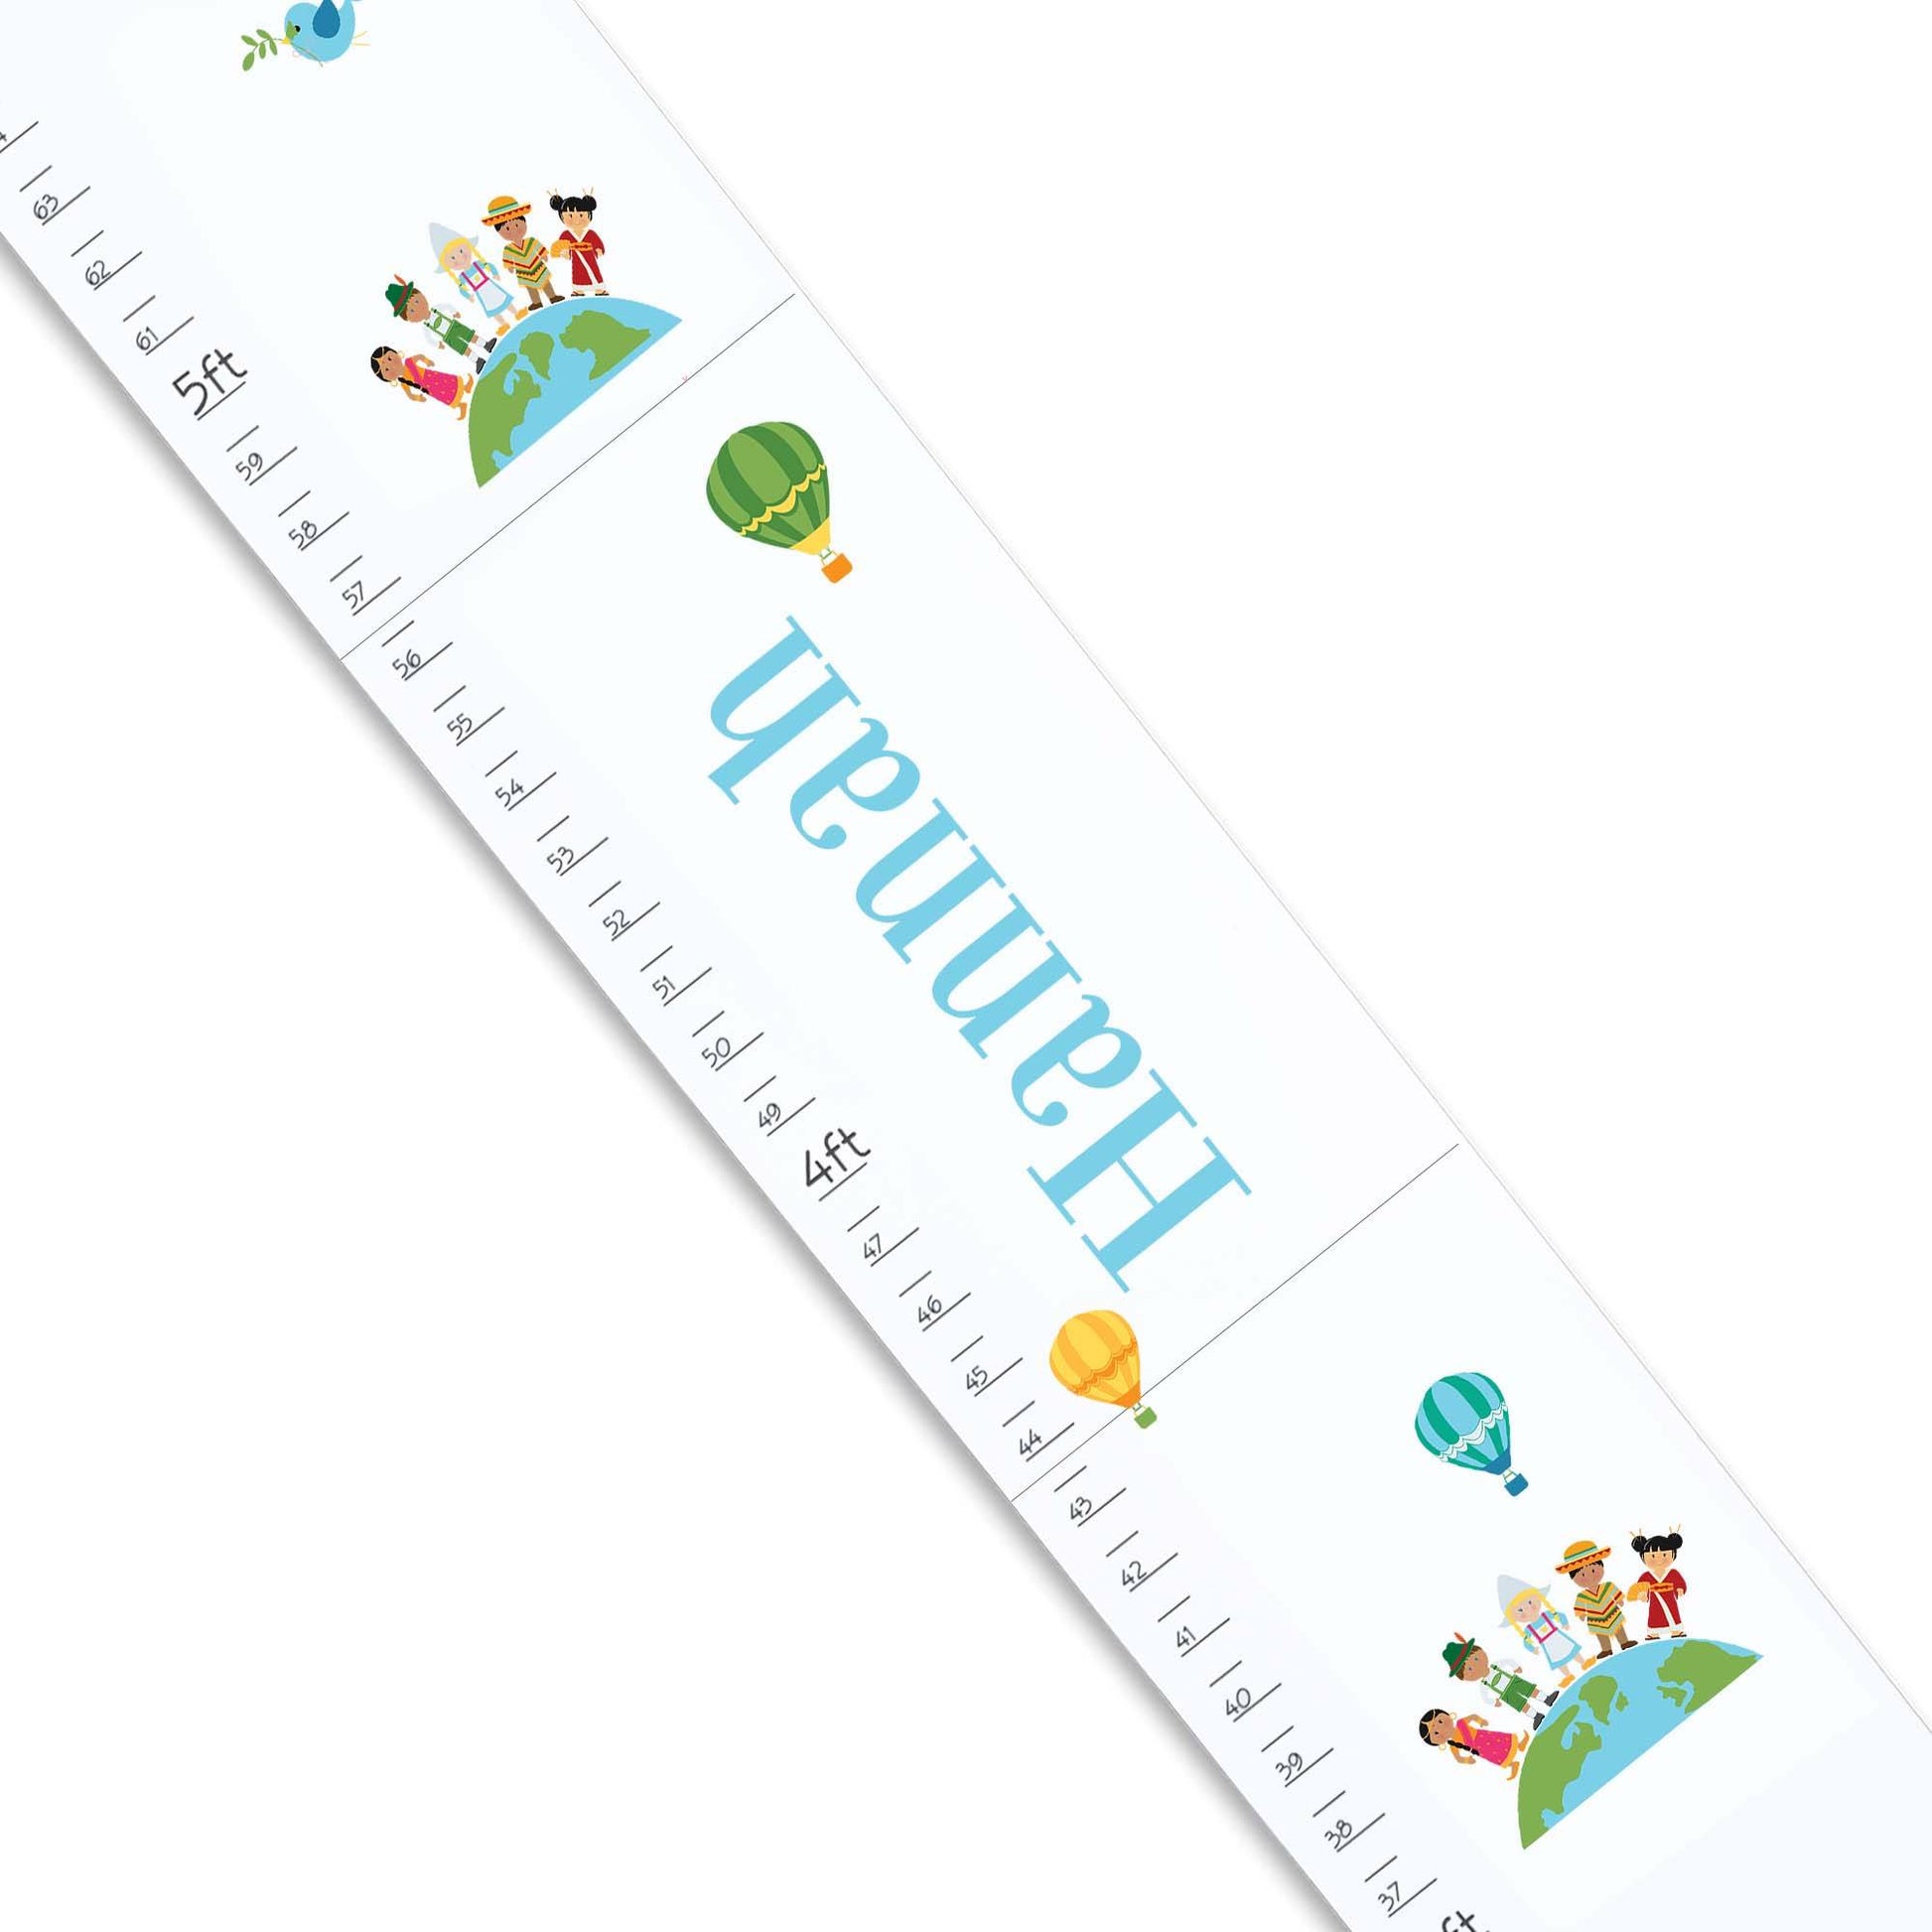 Personalized White Growth Chart With Small World Design